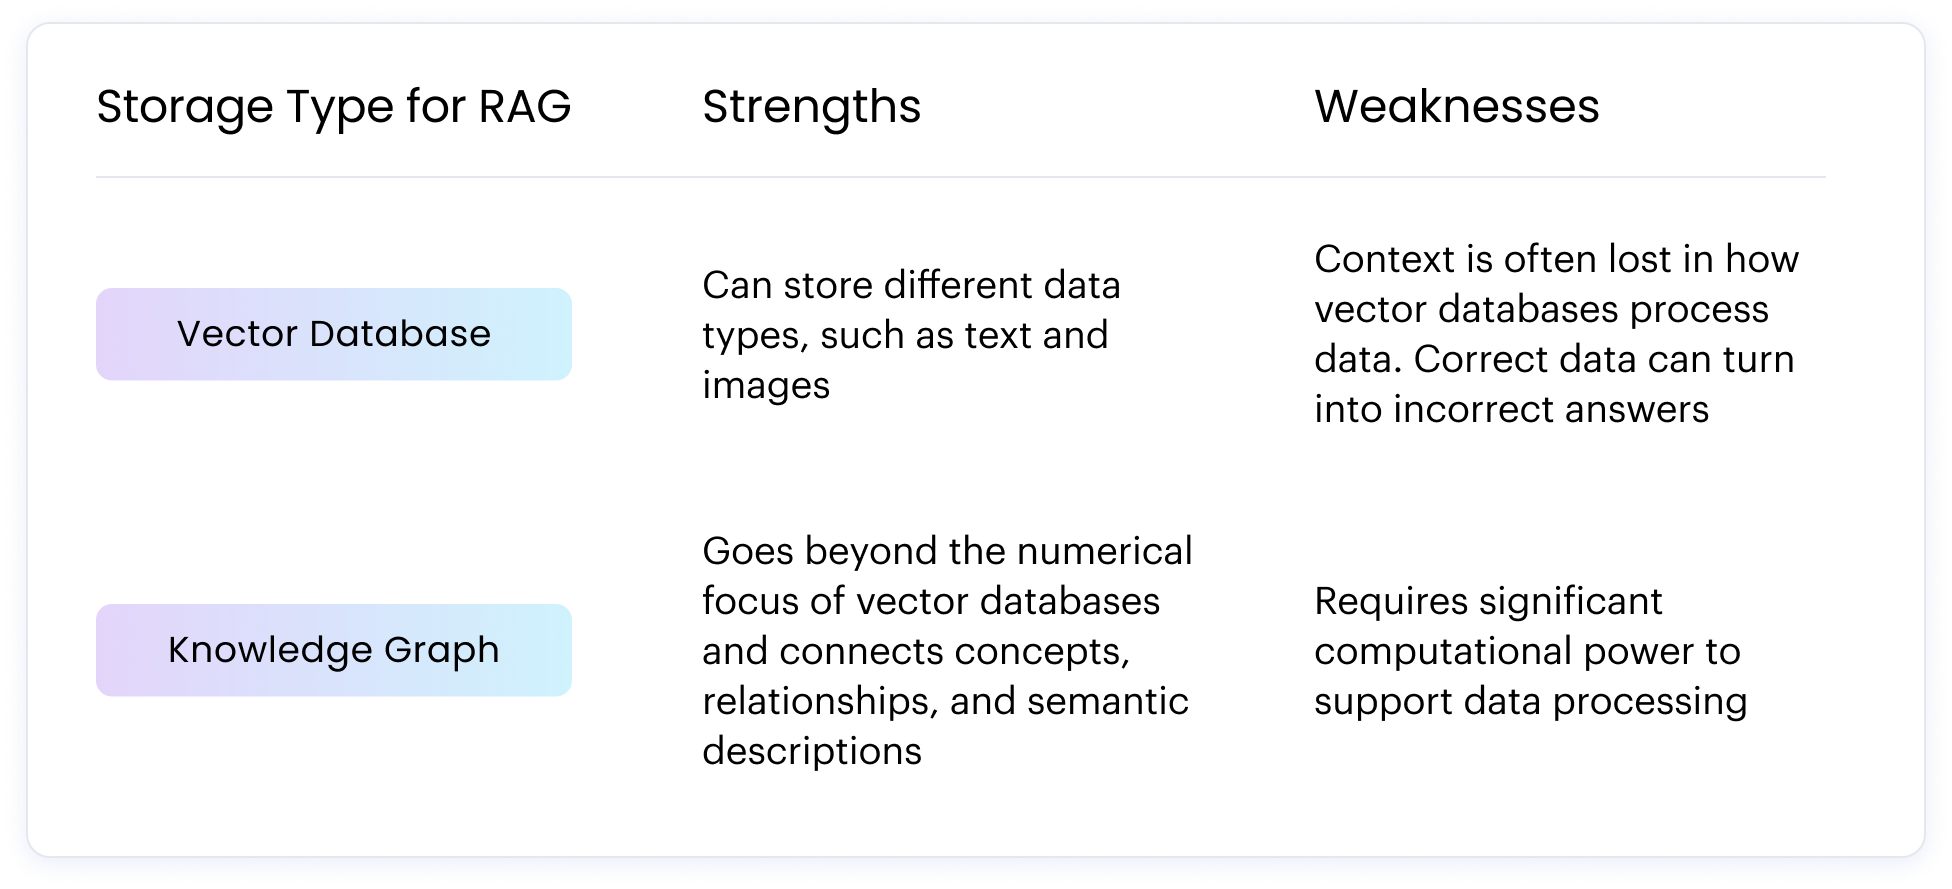 The table below compares two storage options for RAG: vector database and knowledge graph. The vector database can store different data types, such as text and images, but the context is often lost in how vector databases process data, which can lead to incorrect answers. The knowledge graph goes beyond the numerical focus of vector databases and connects concepts, relationships, and semantic descriptions, but it requires significant computational power to support data processing.